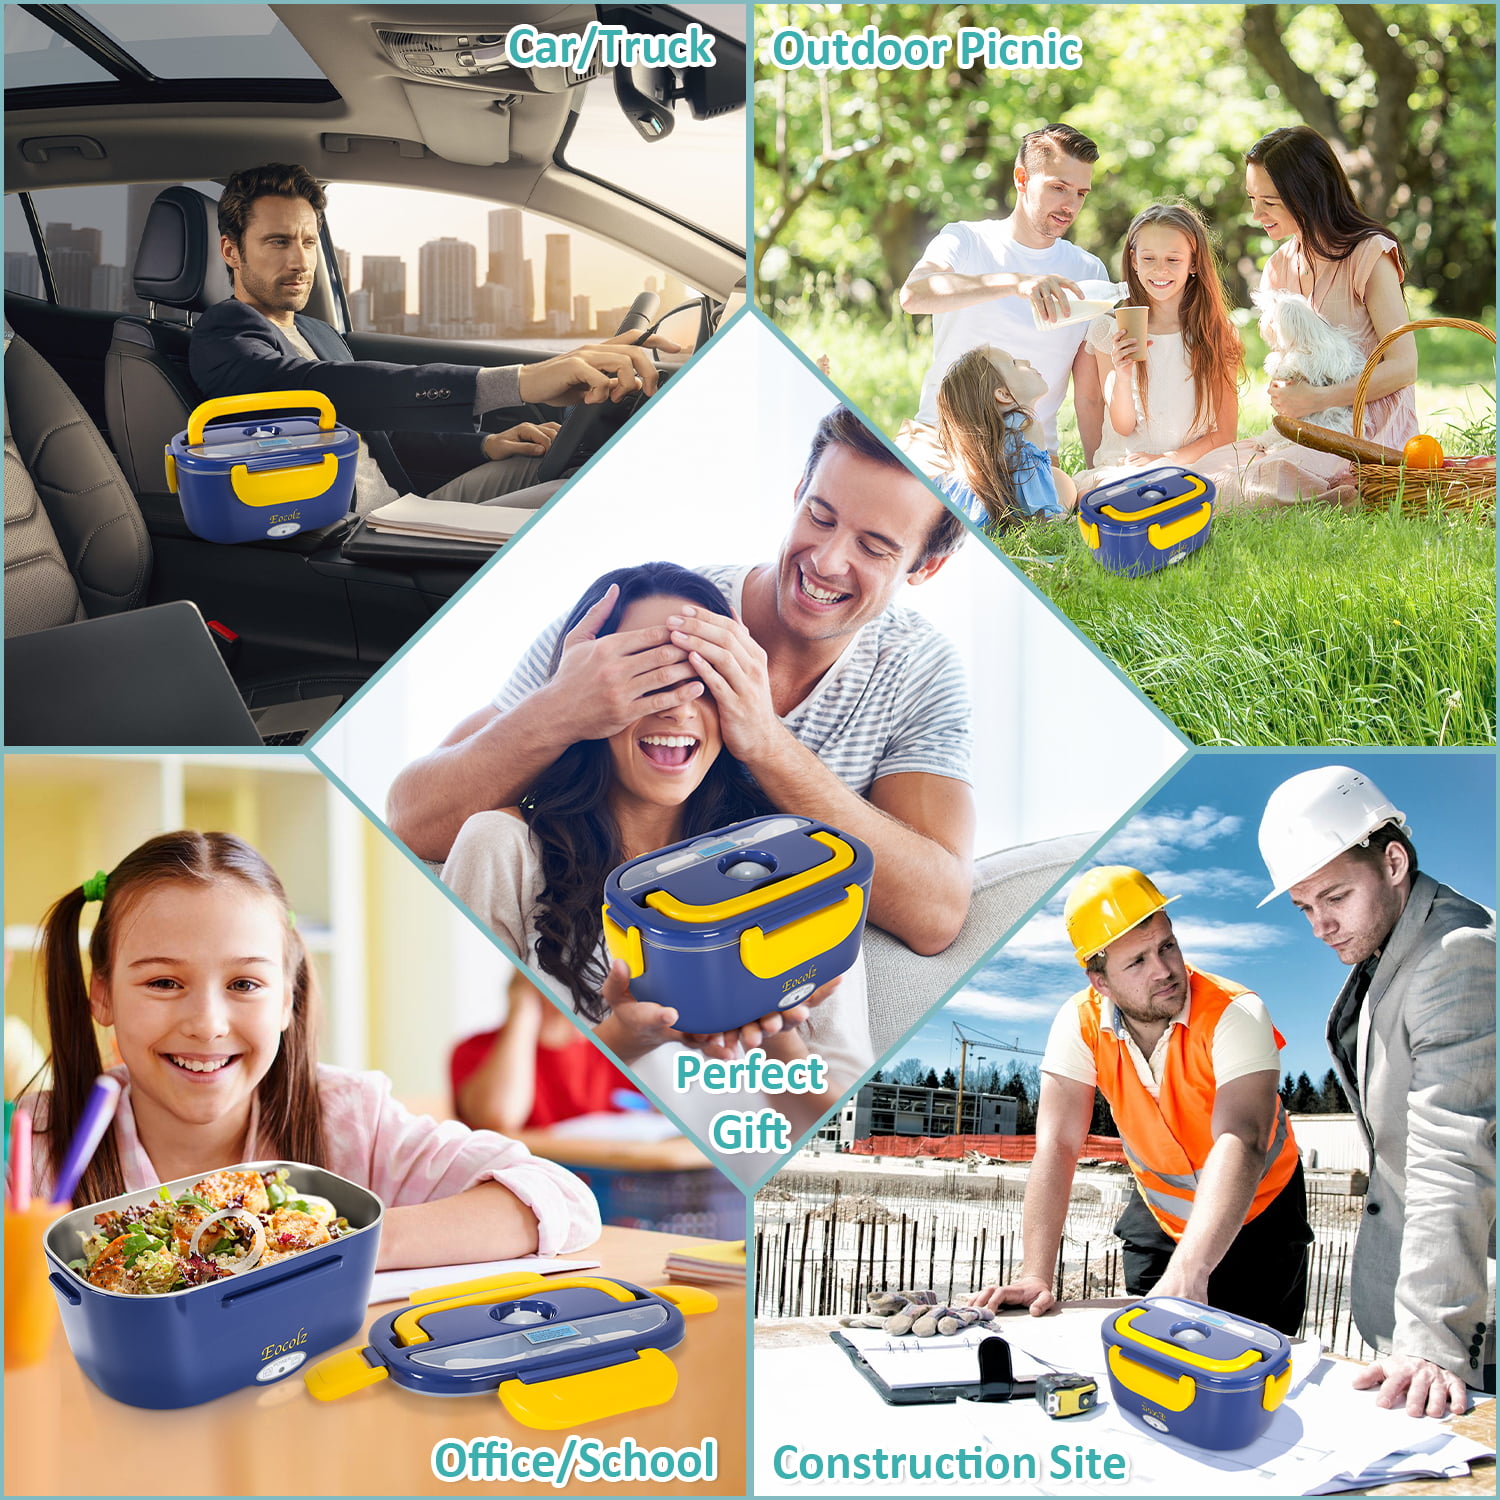 Electric Lunch Box Food Heater - 2-In-1 Portable Food Warmer Lunch Box for  Car & Home – Leak proof, …See more Electric Lunch Box Food Heater - 2-In-1